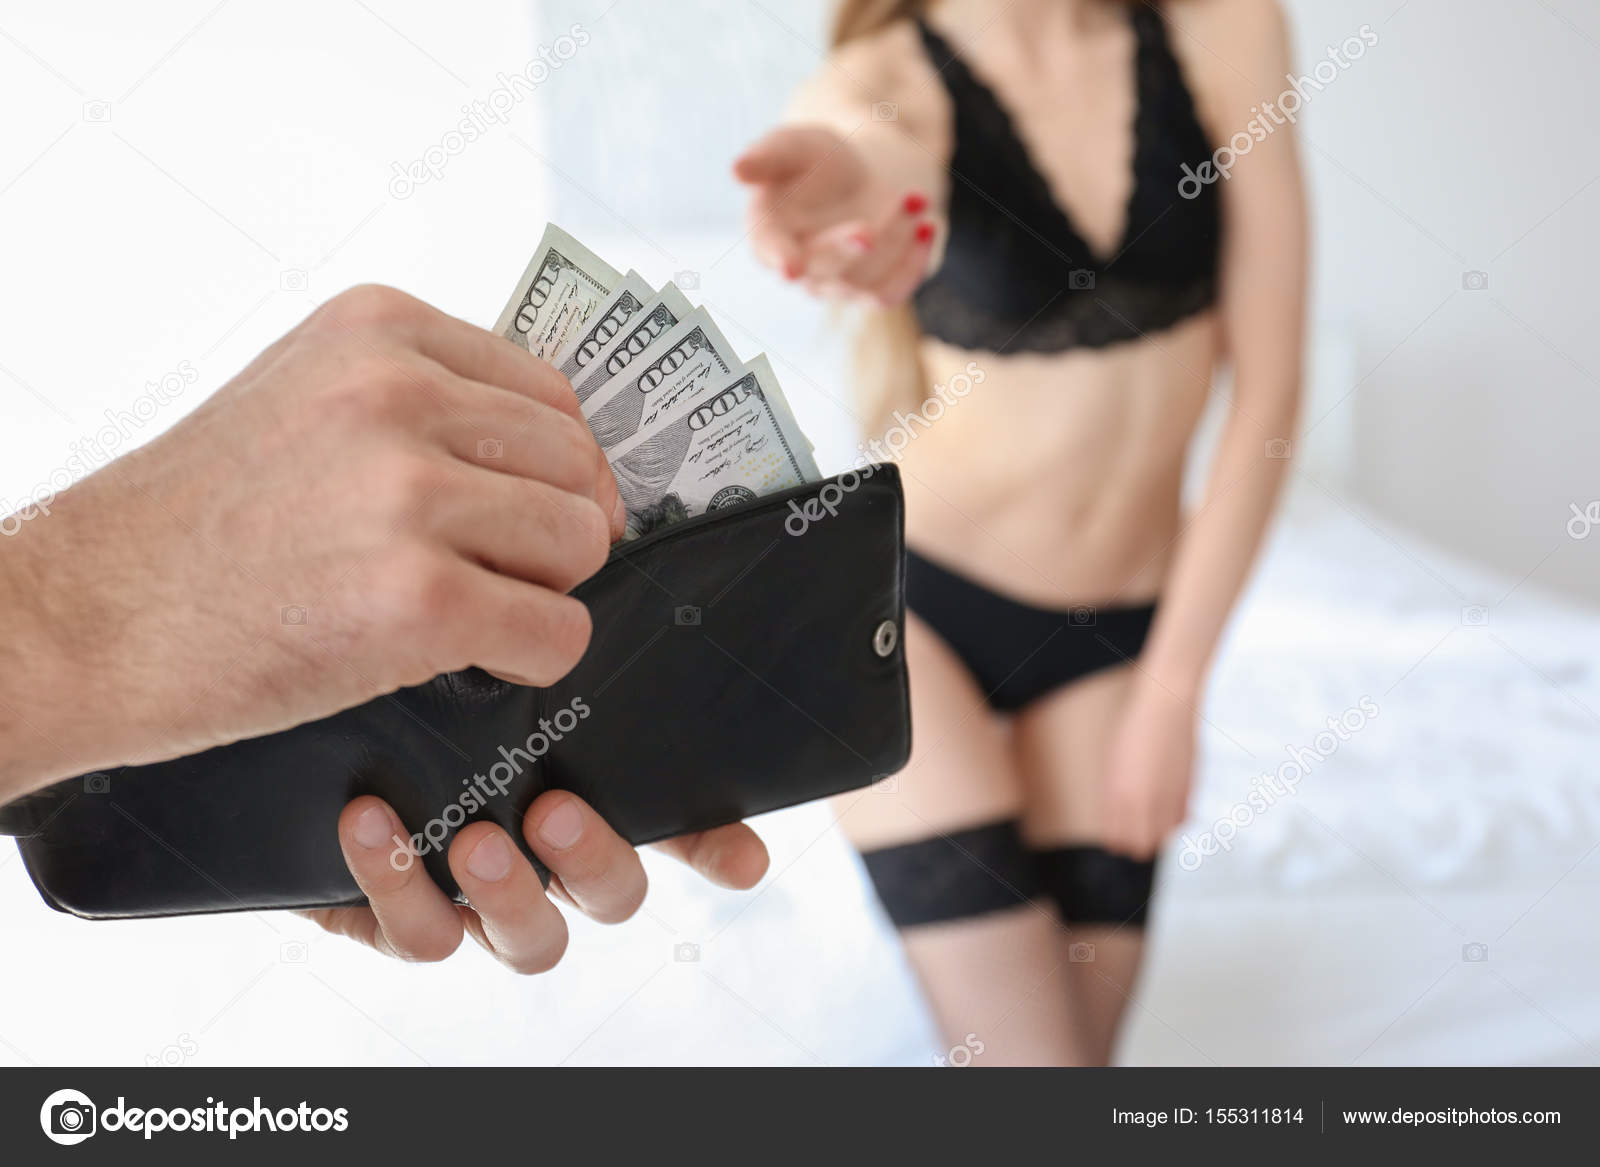 Will Pay Money For Erotic Photos